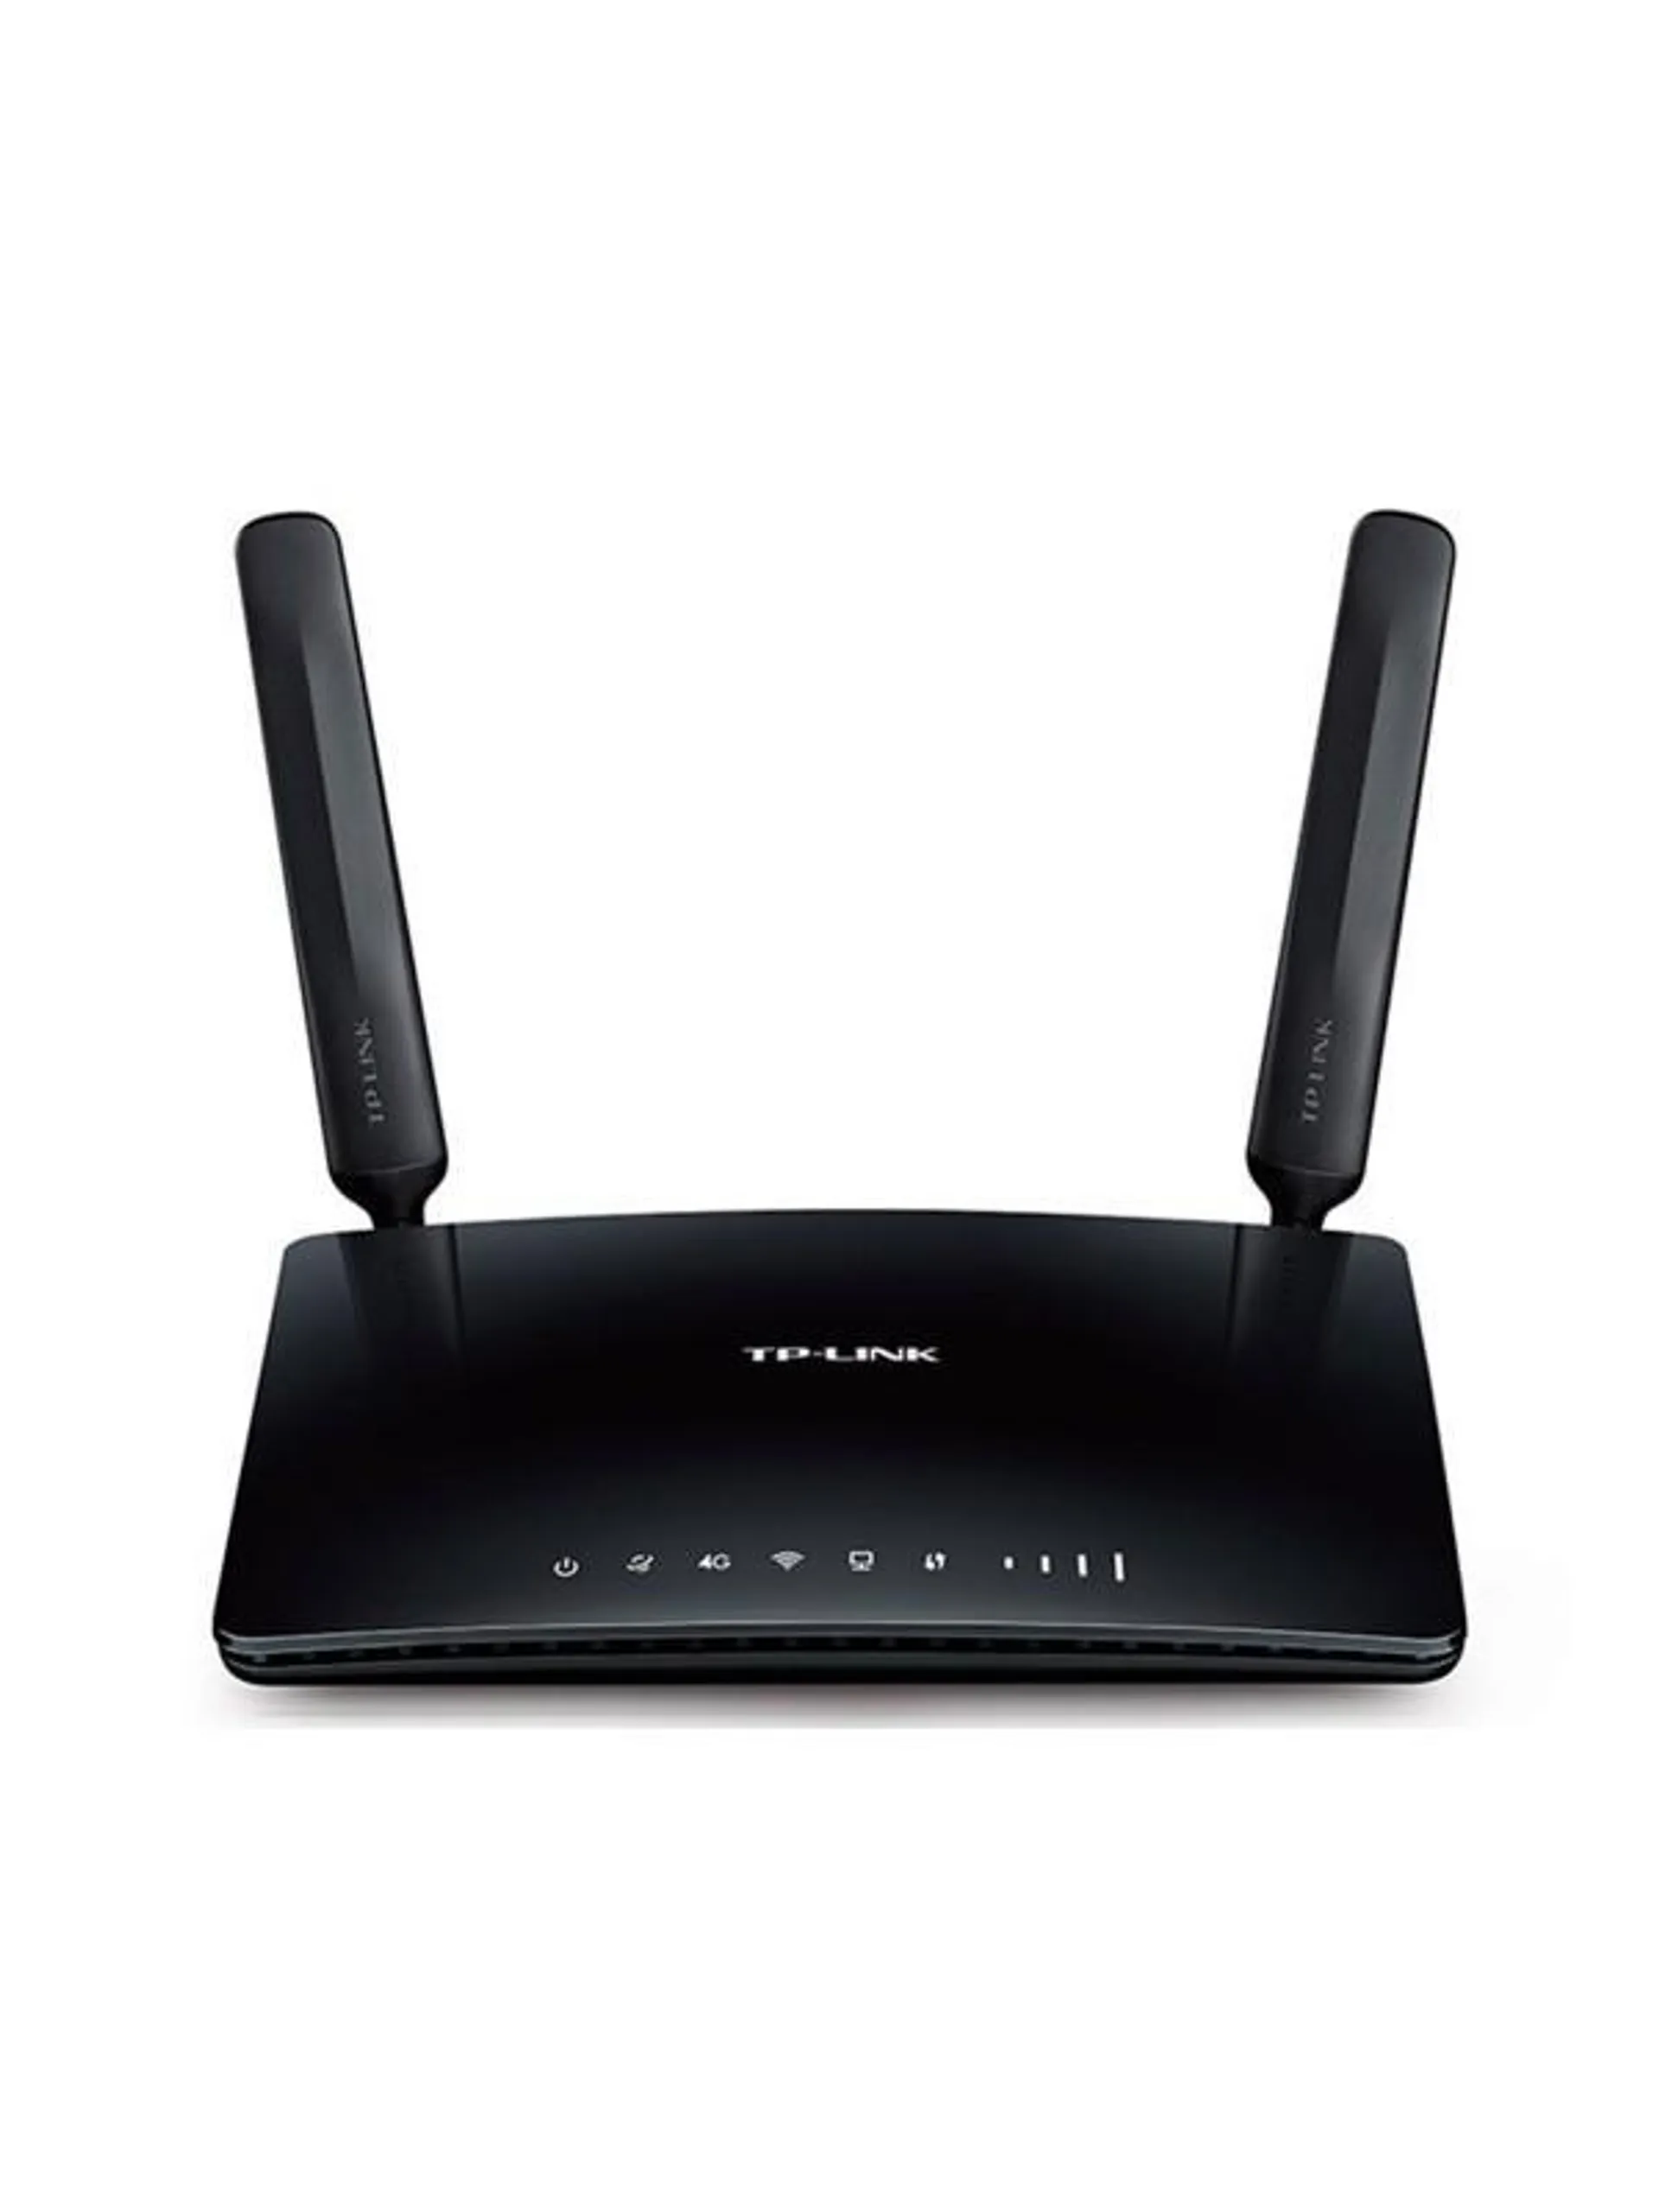 TP-Link 4G 300Mbps Wireless Router | TL-MR6400